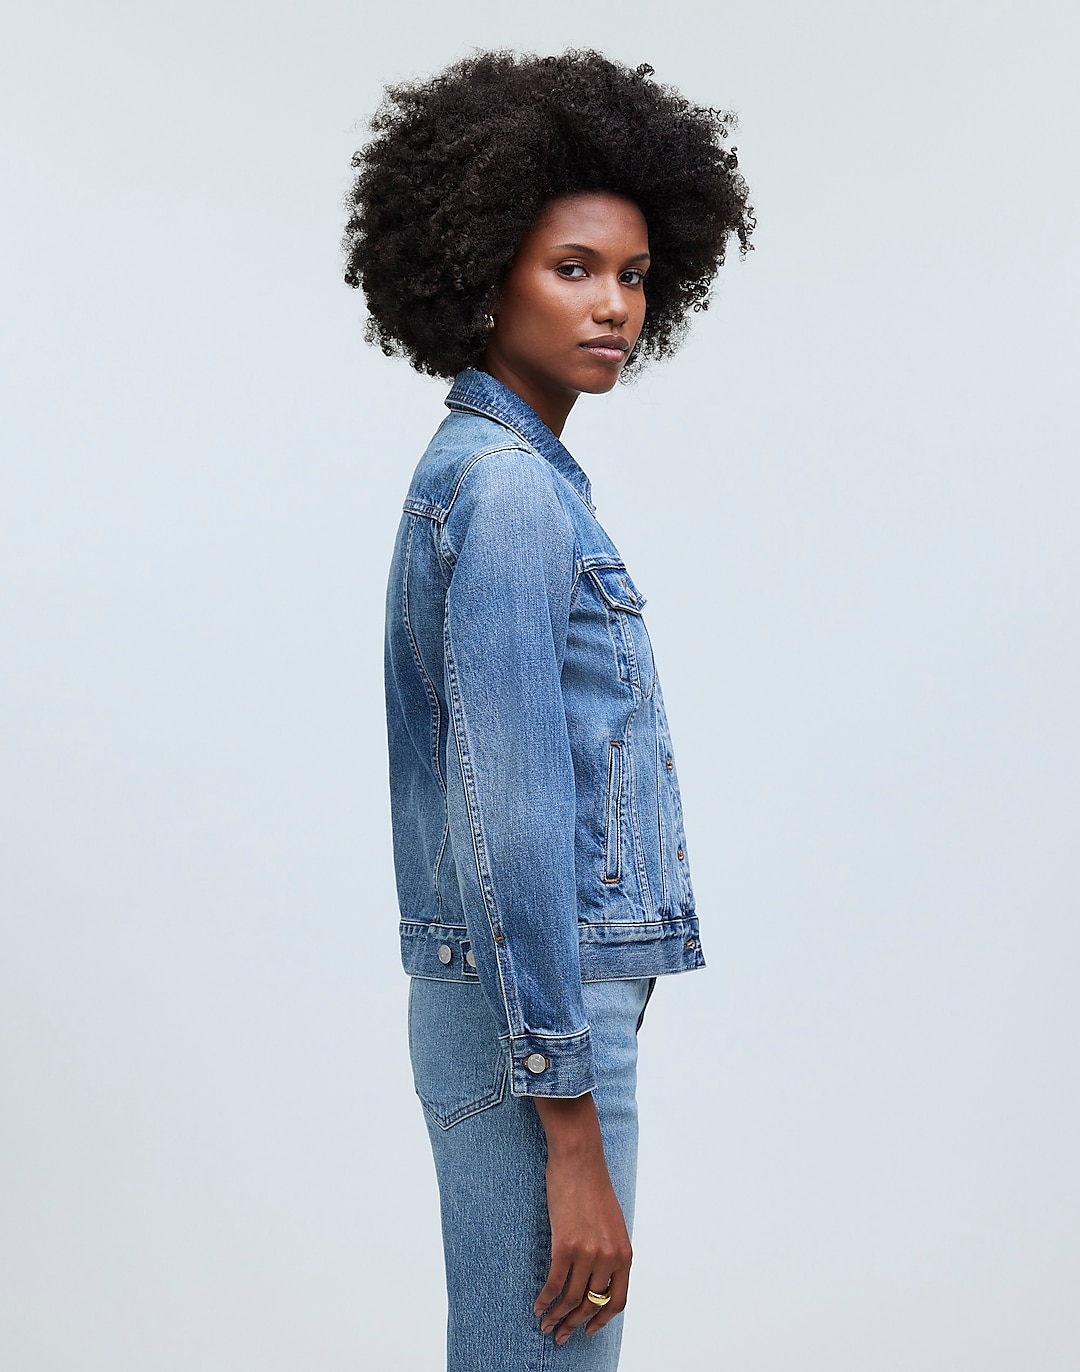 The Jean Jacket in Medford Wash | Madewell